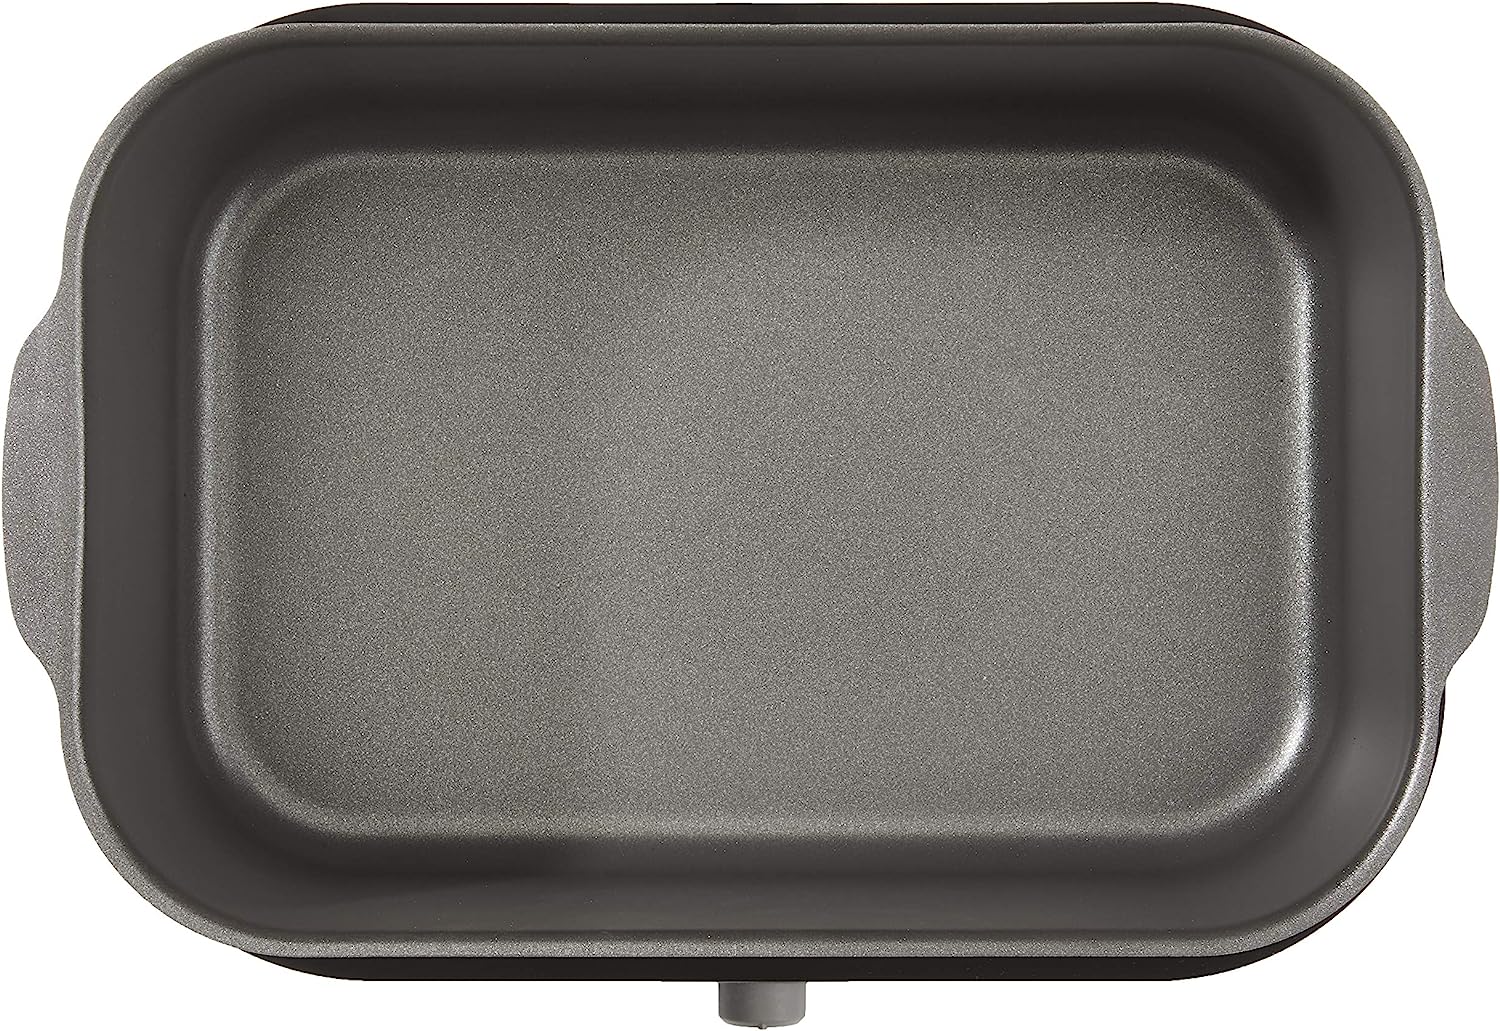 https://bigbigmart.com/wp-content/uploads/2023/07/West-Bend-87905-Slow-Cooker-Large-Capacity-Non-stick-Variable-Temperature-Control-Includes-Travel-Lid-and-Thermal-Carrying-Case-5-Quart-Silver9.jpg